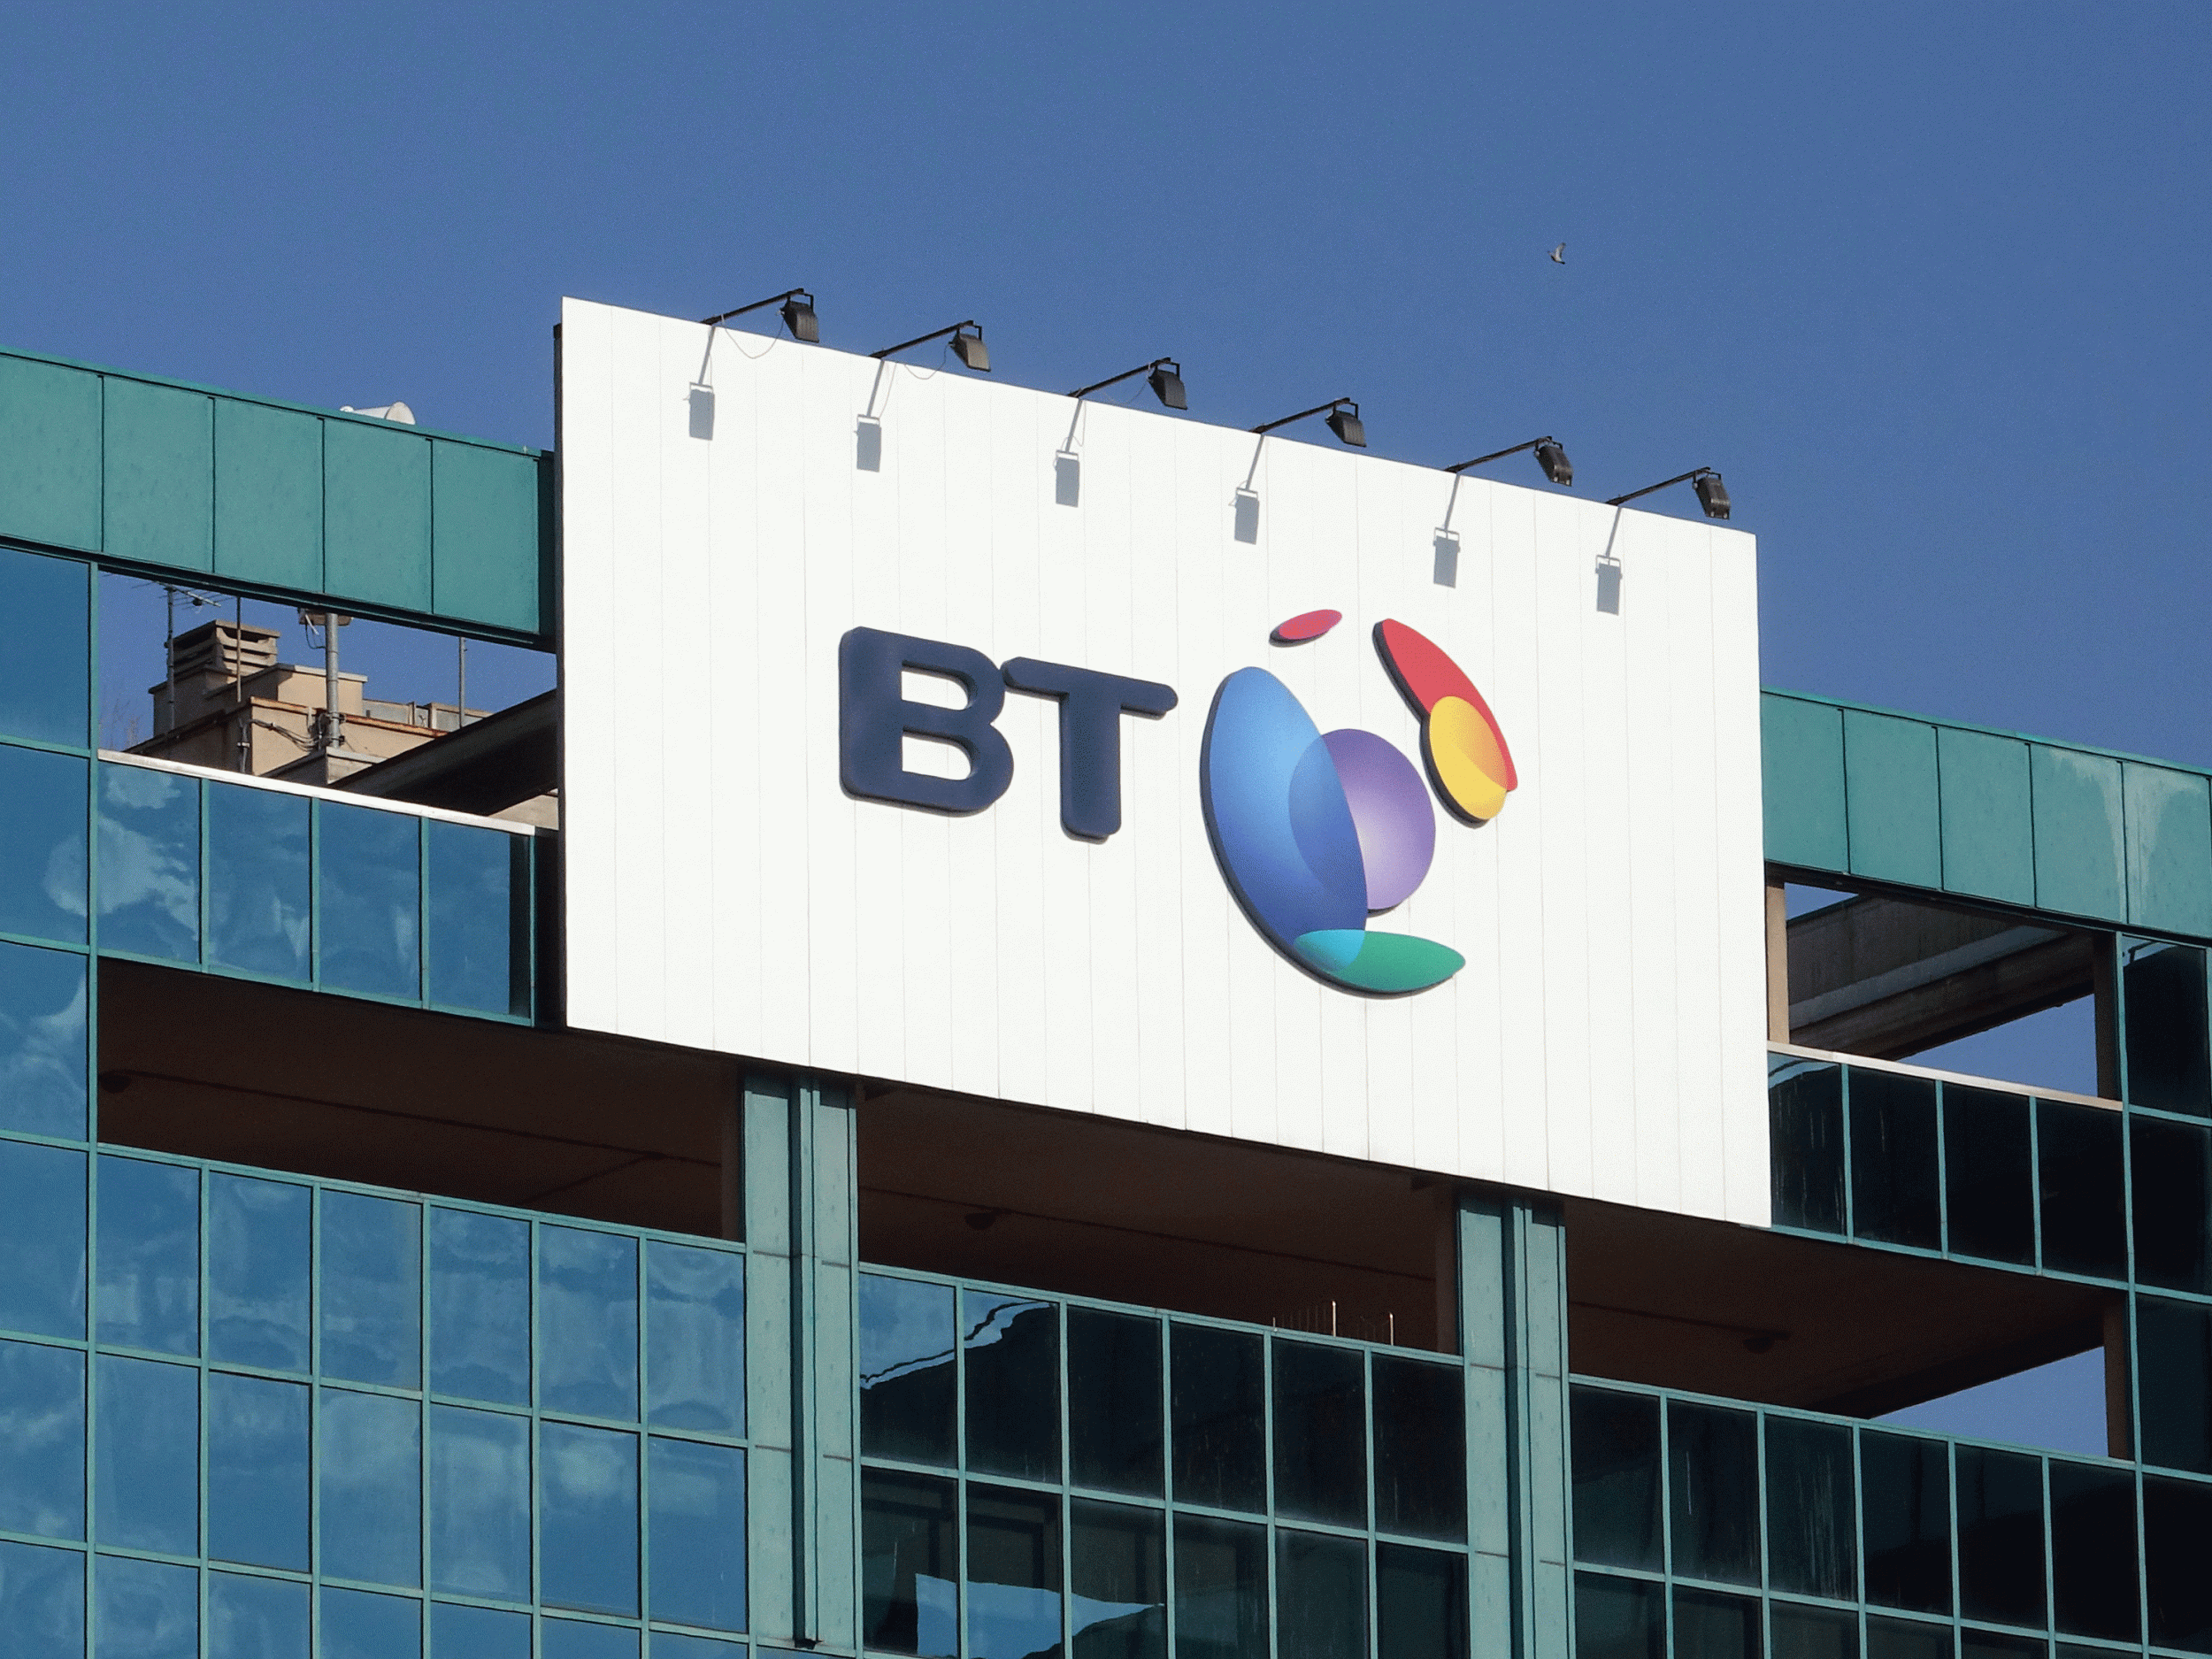 Separately on Thursday BT said that chief executive Gavin Patterson and former group finance director Tony Chanmugam would not be receiving a bonus for the 2016/17 financial year